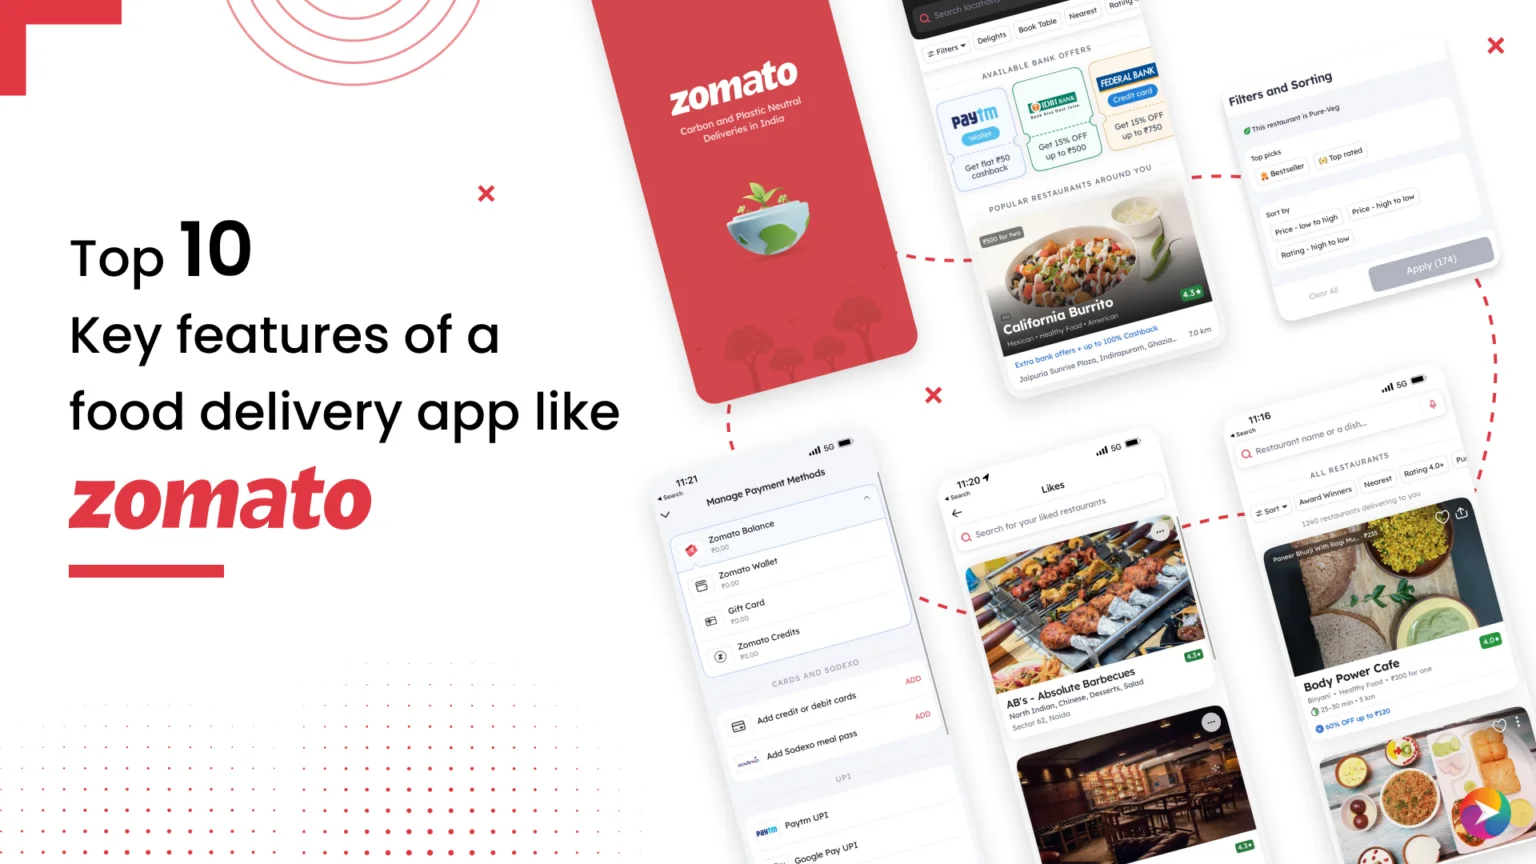 Top 10 Key features of a food delivery app like Zomato